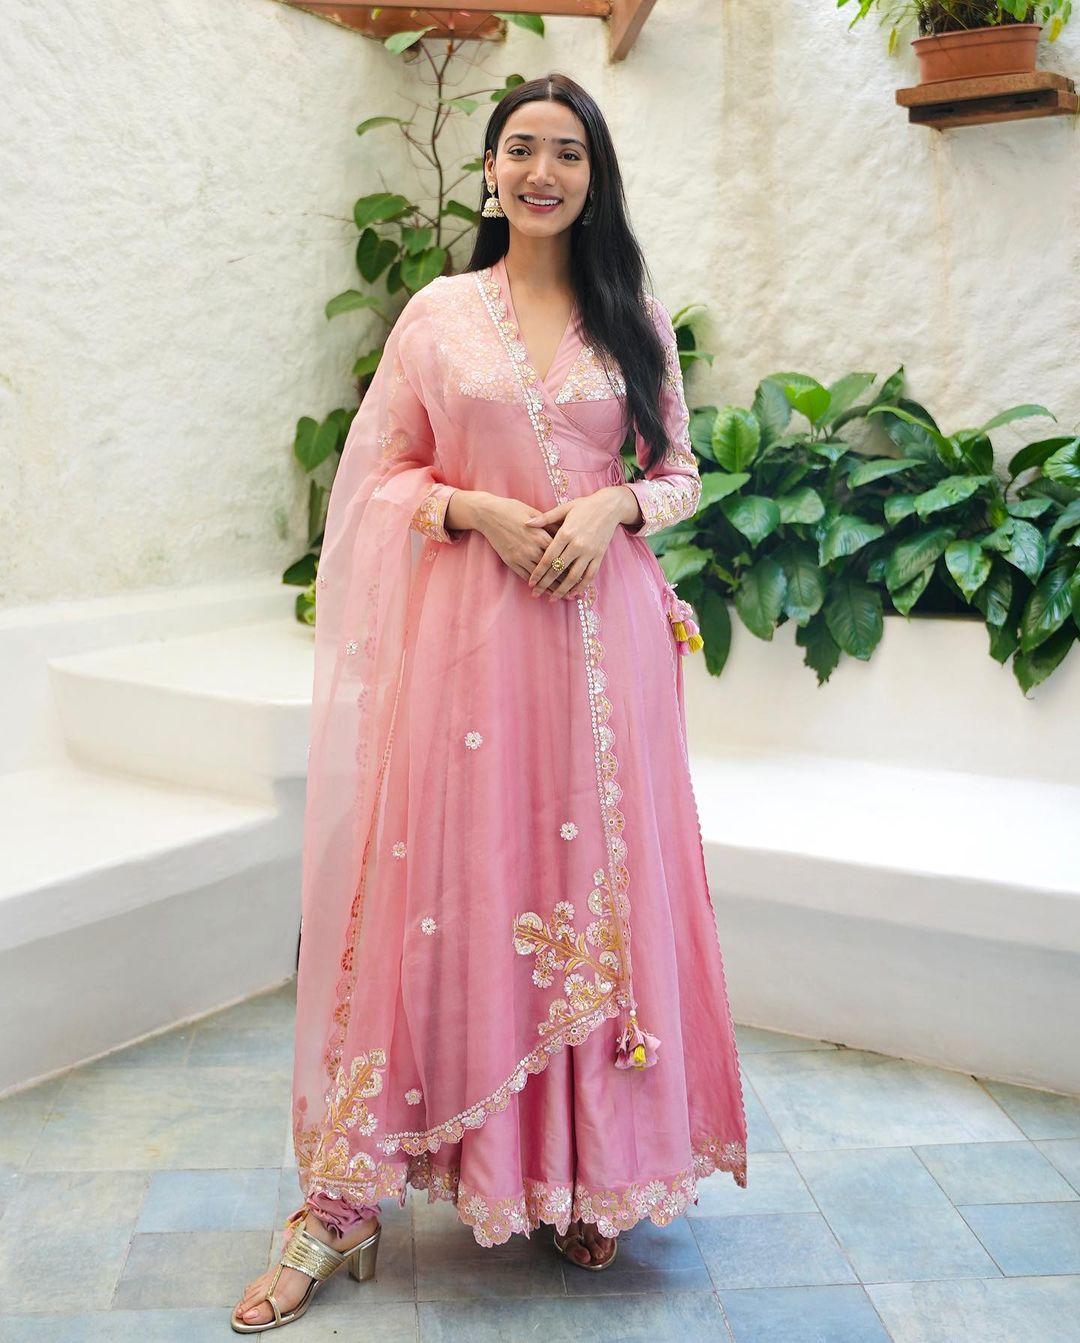 Radiating beauty, Medha wears a stunning pink suit adorned with intricate designs